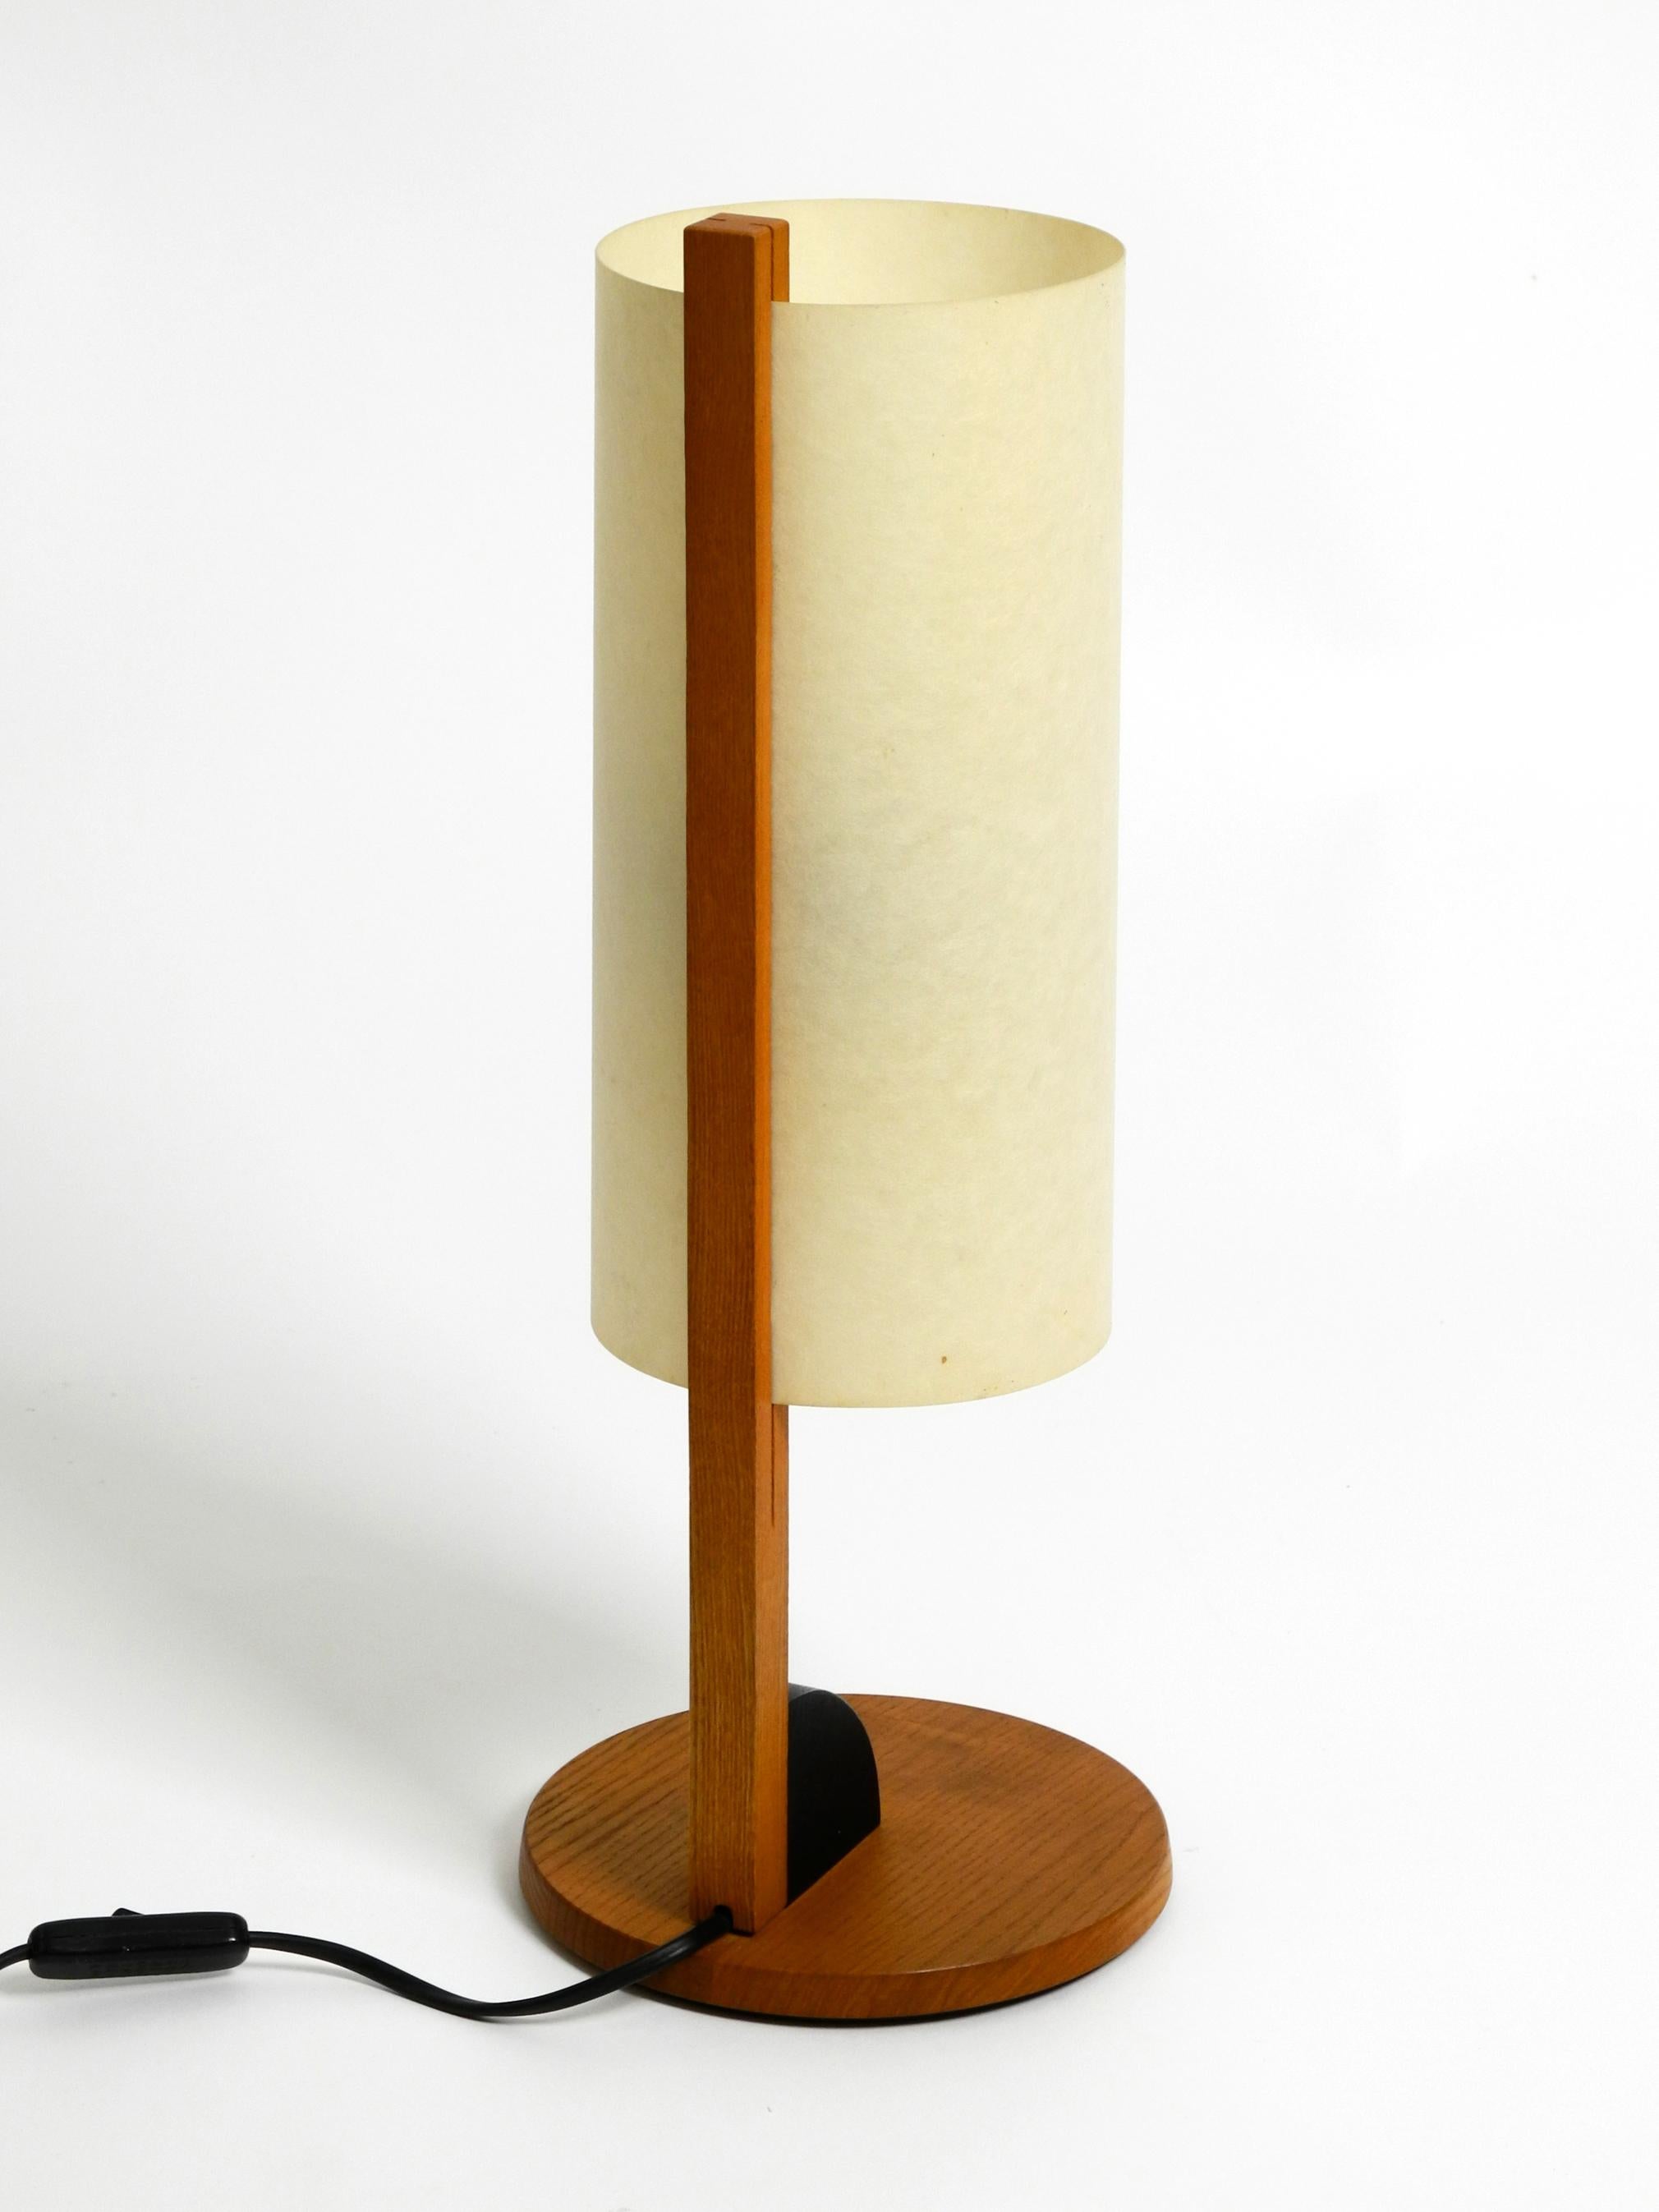 German Beautiful Large Minimalist Teak Table Lamp with Lunopal Shade by Domus 80s